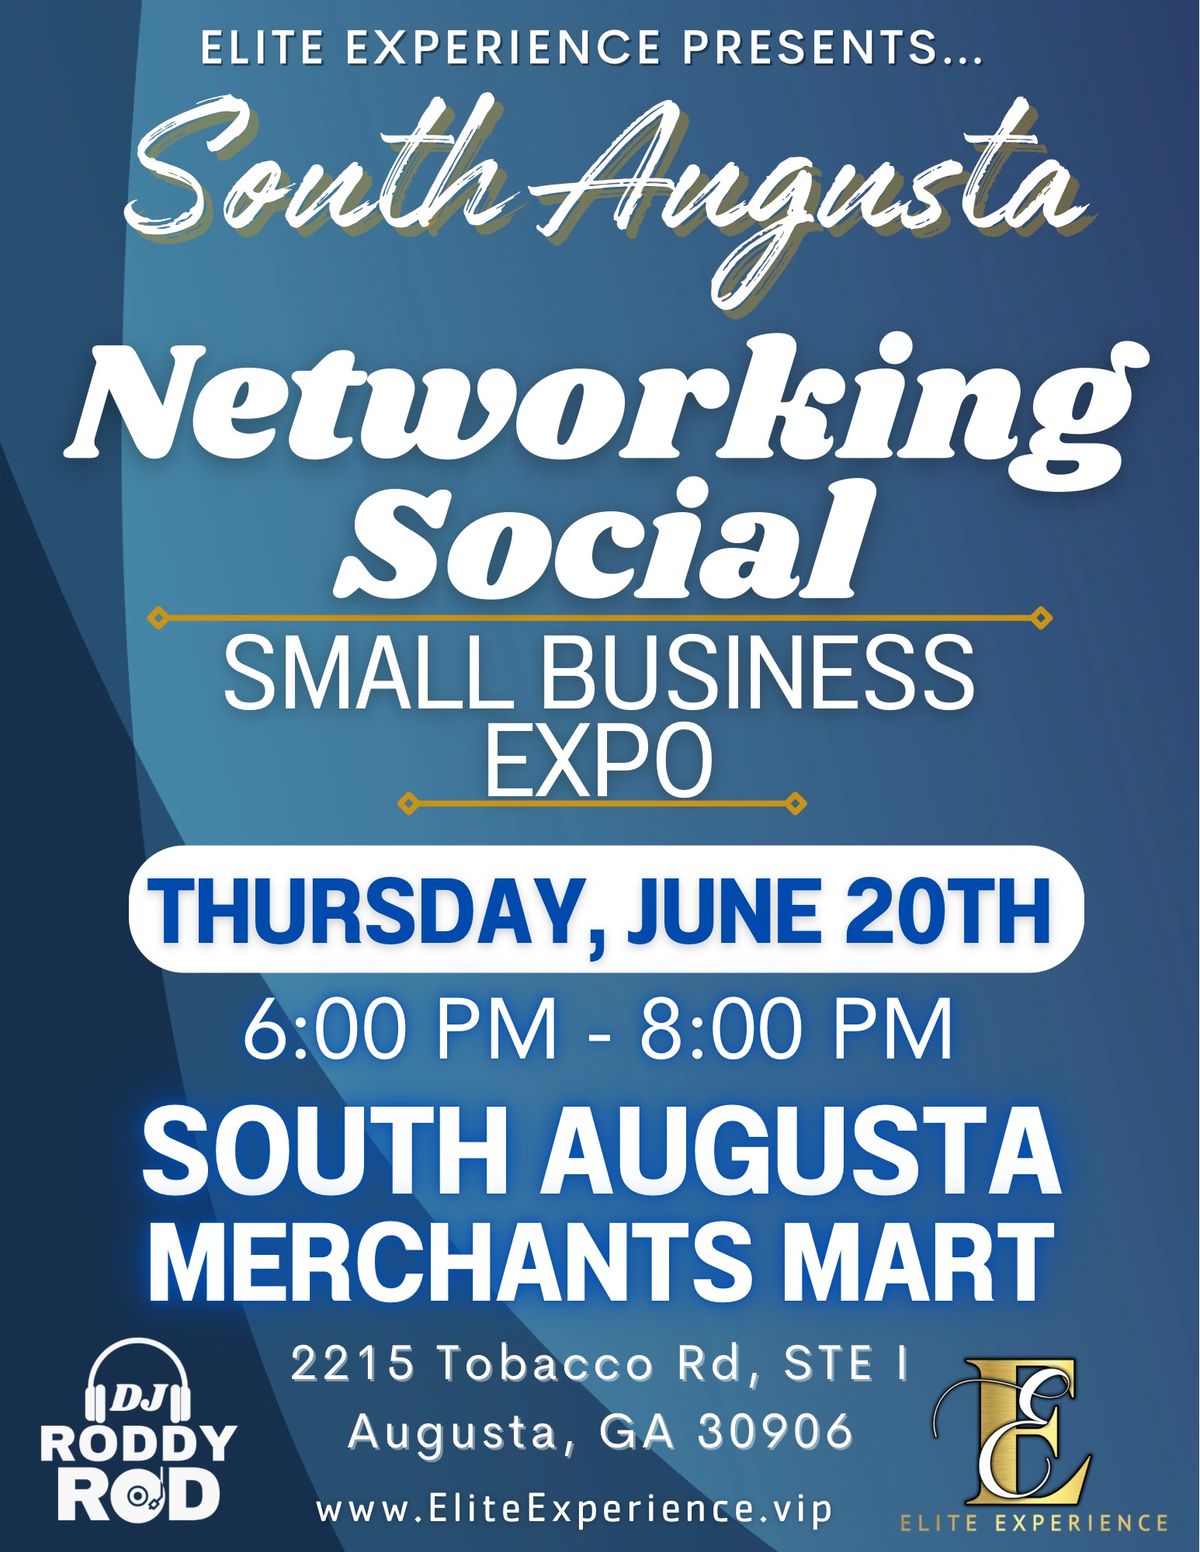 South Augusta Networking Social